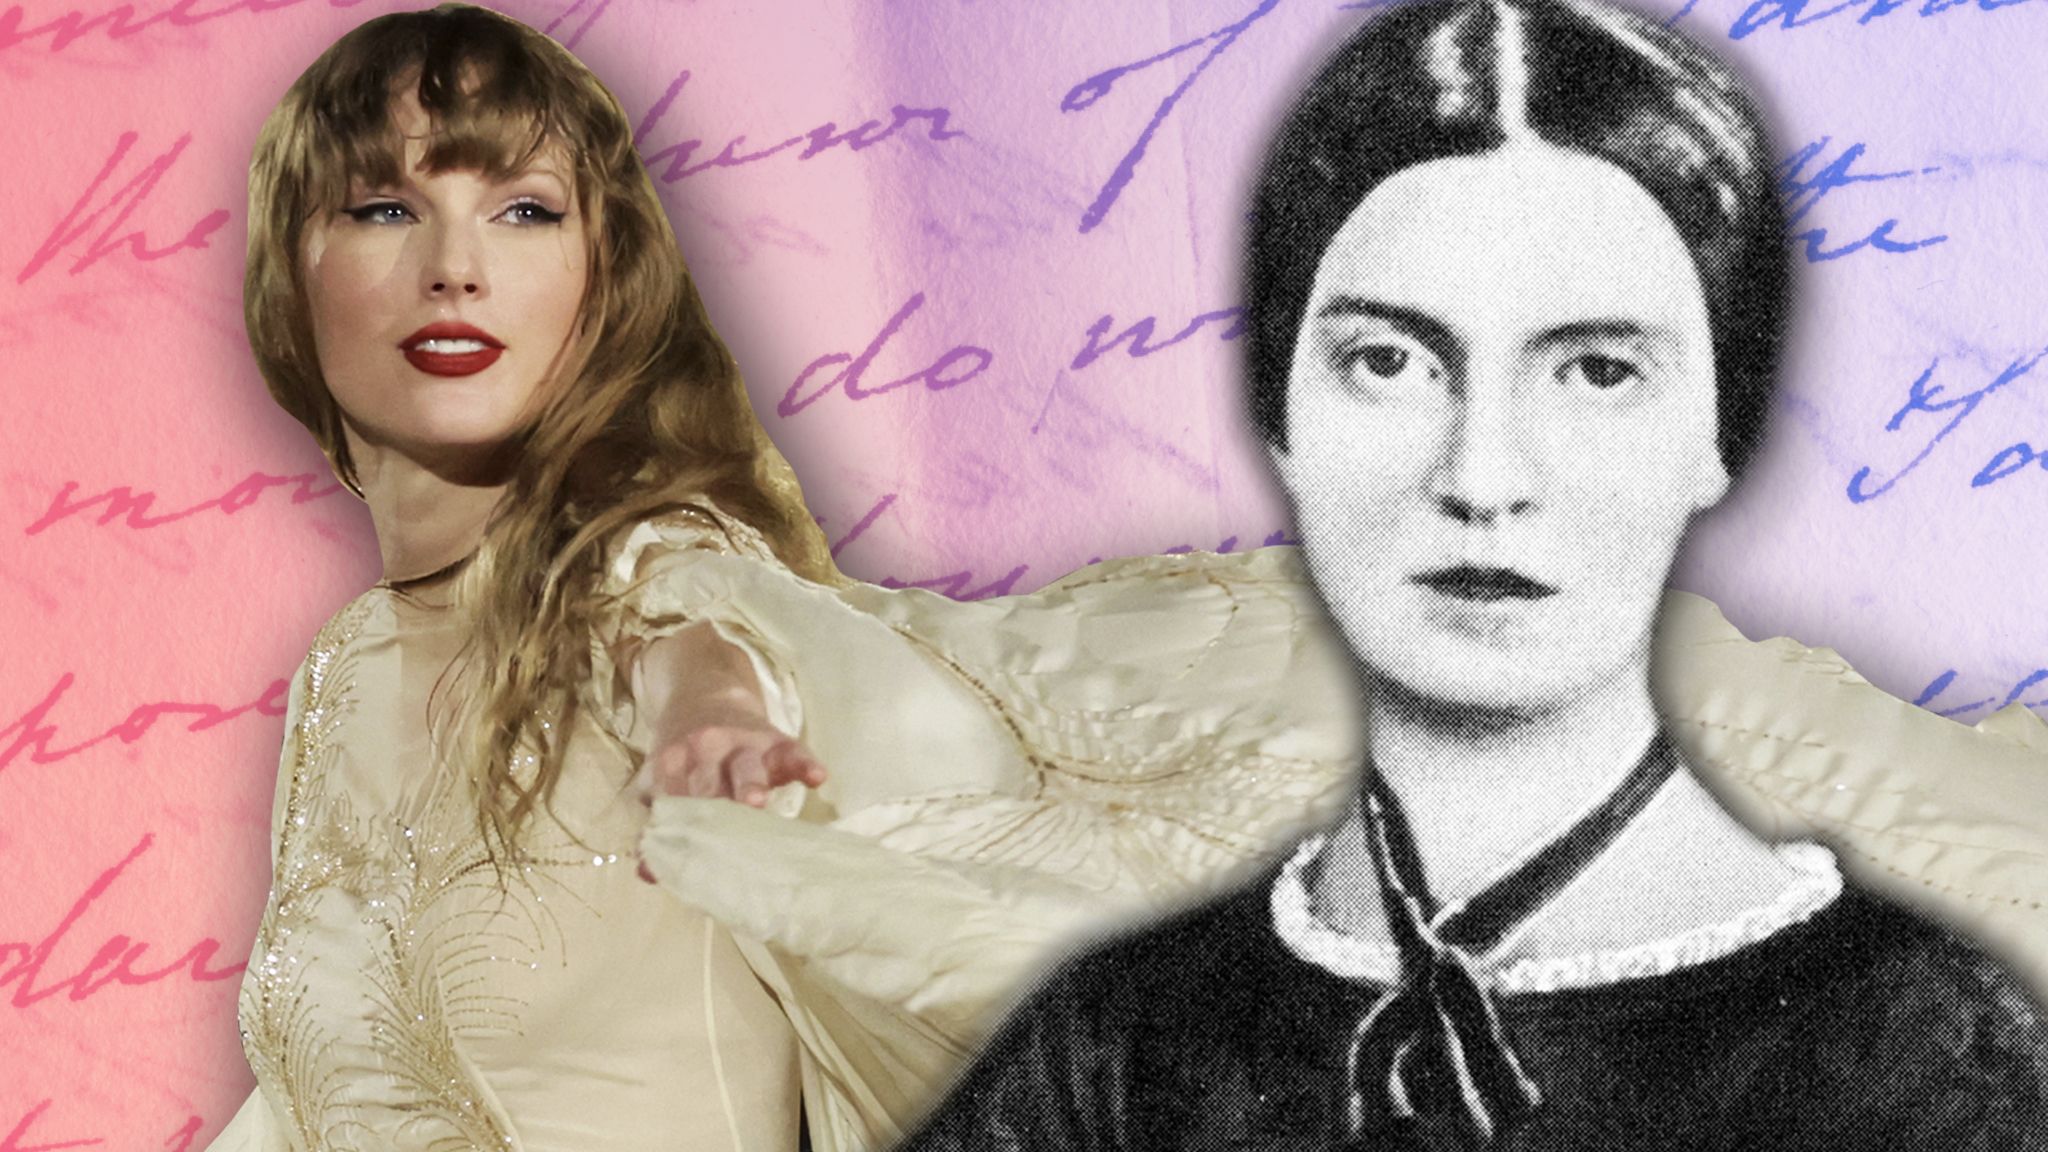 composite image shows taylor swift on the left and an archive picture of poet emily dickinson on the right